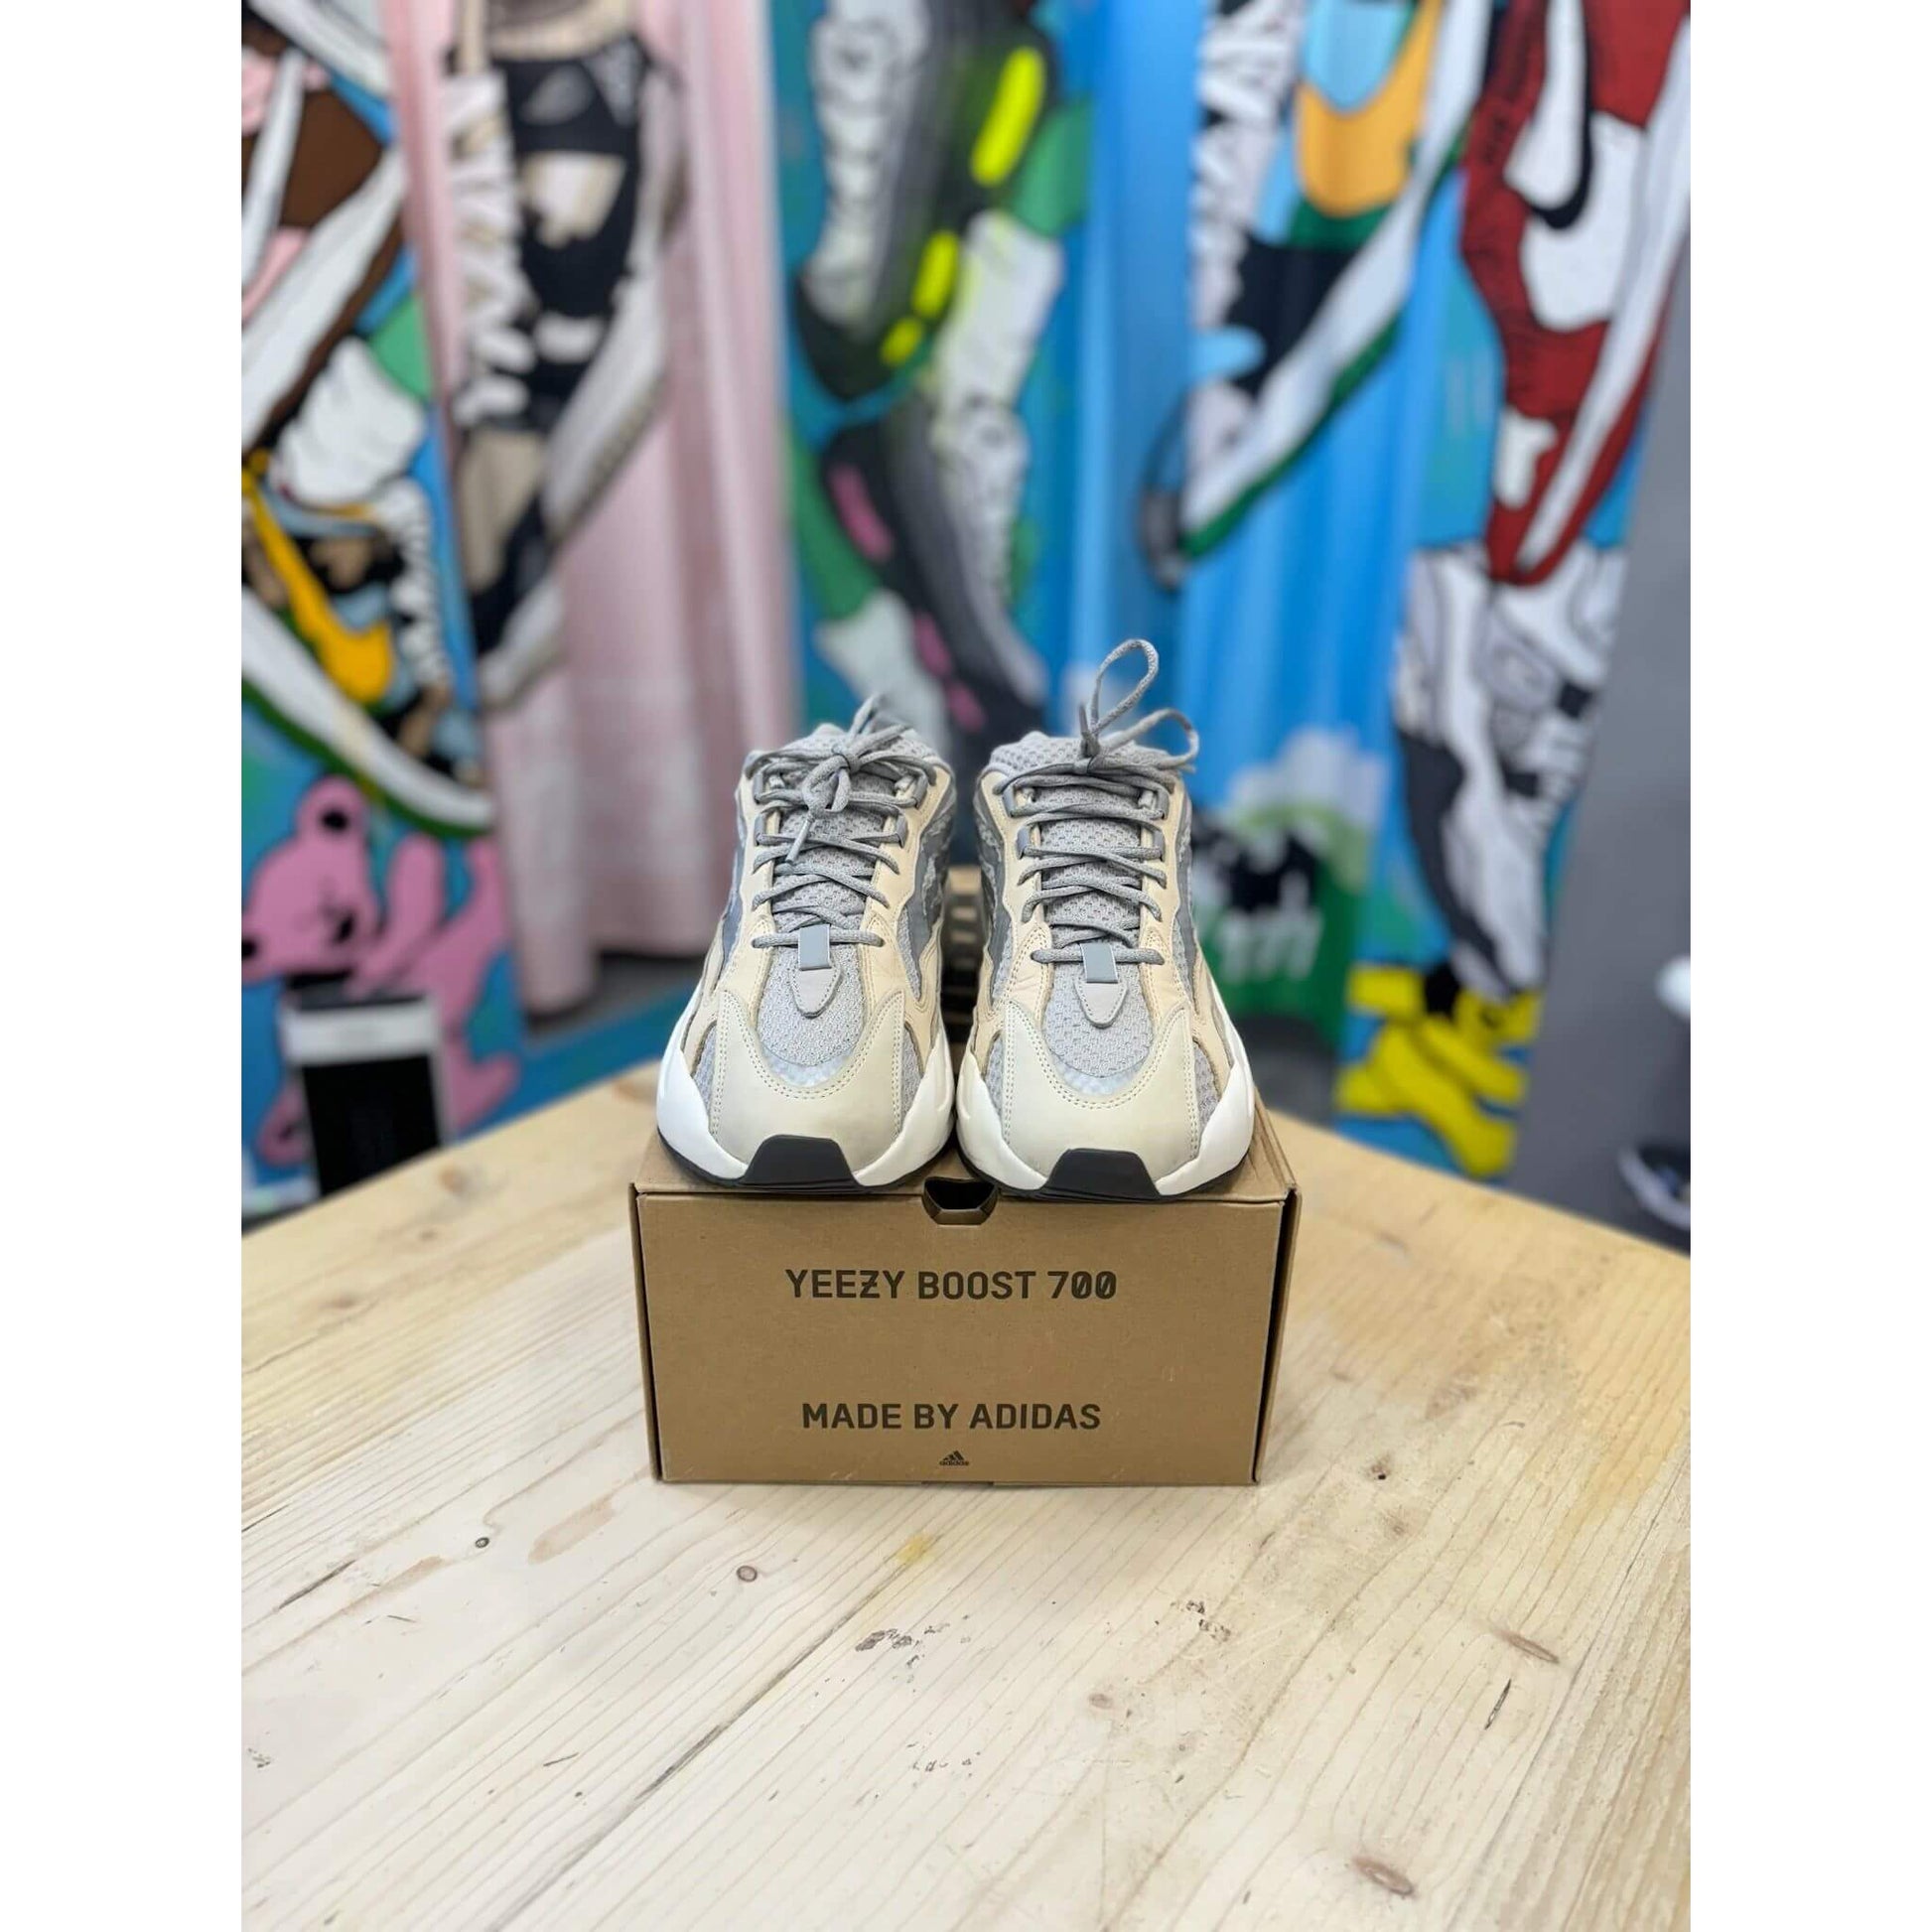 Adidas Yeezy Boost 700 V2 Cream UK 13 by Yeezy from £200.00